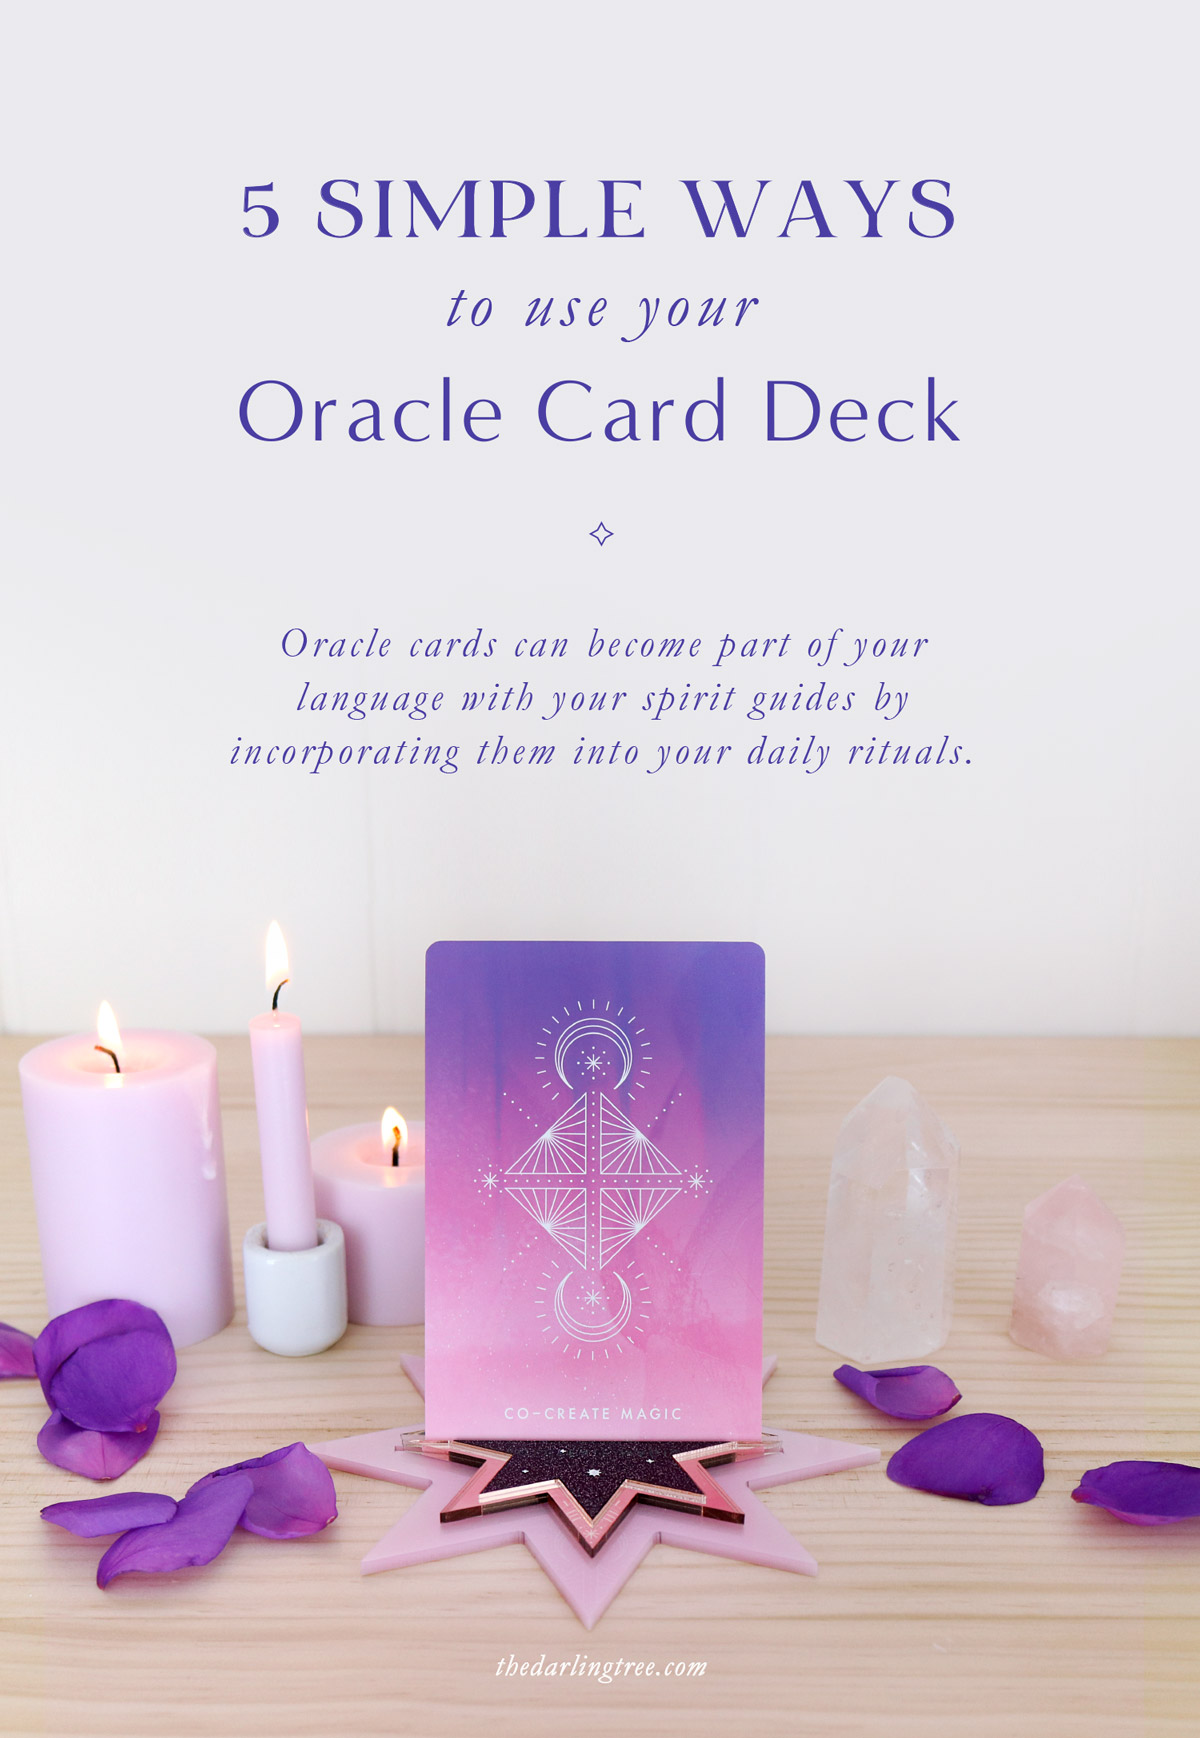 5 Simple Ways to Use Your Oracle Card Deck